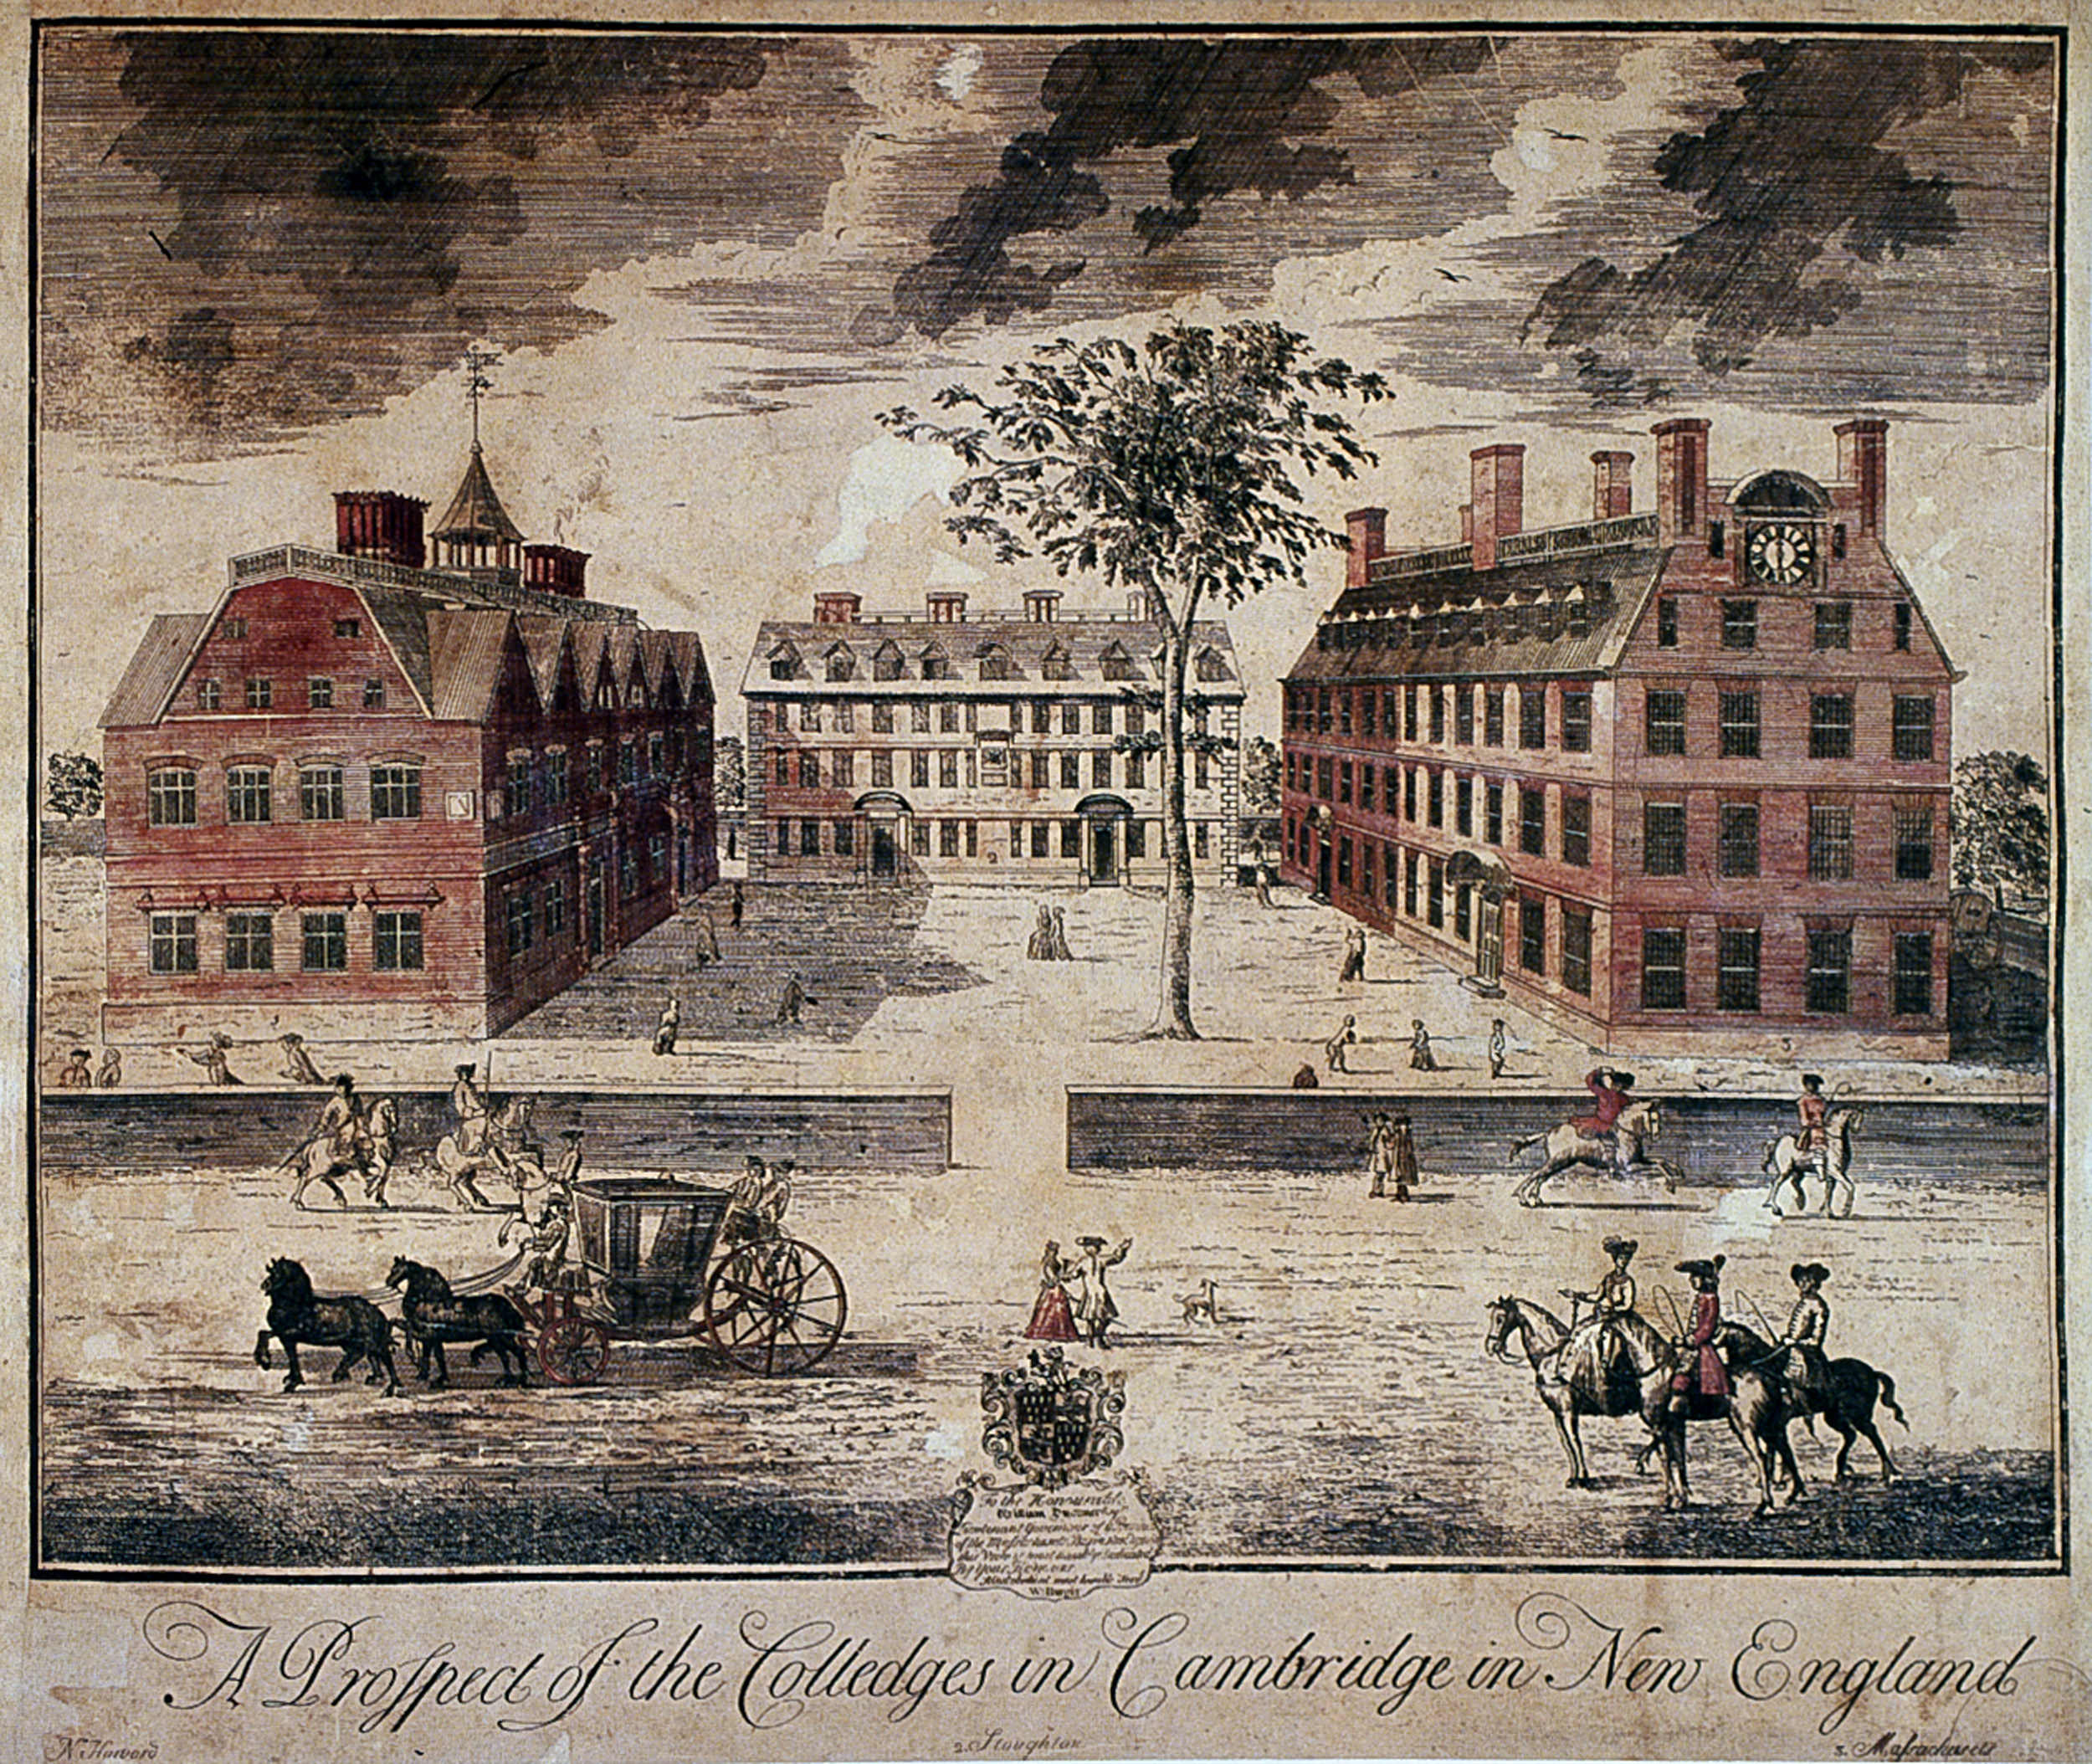 A Prospect of the Colledges in Cambridge in New England, William Burgis, 1726.